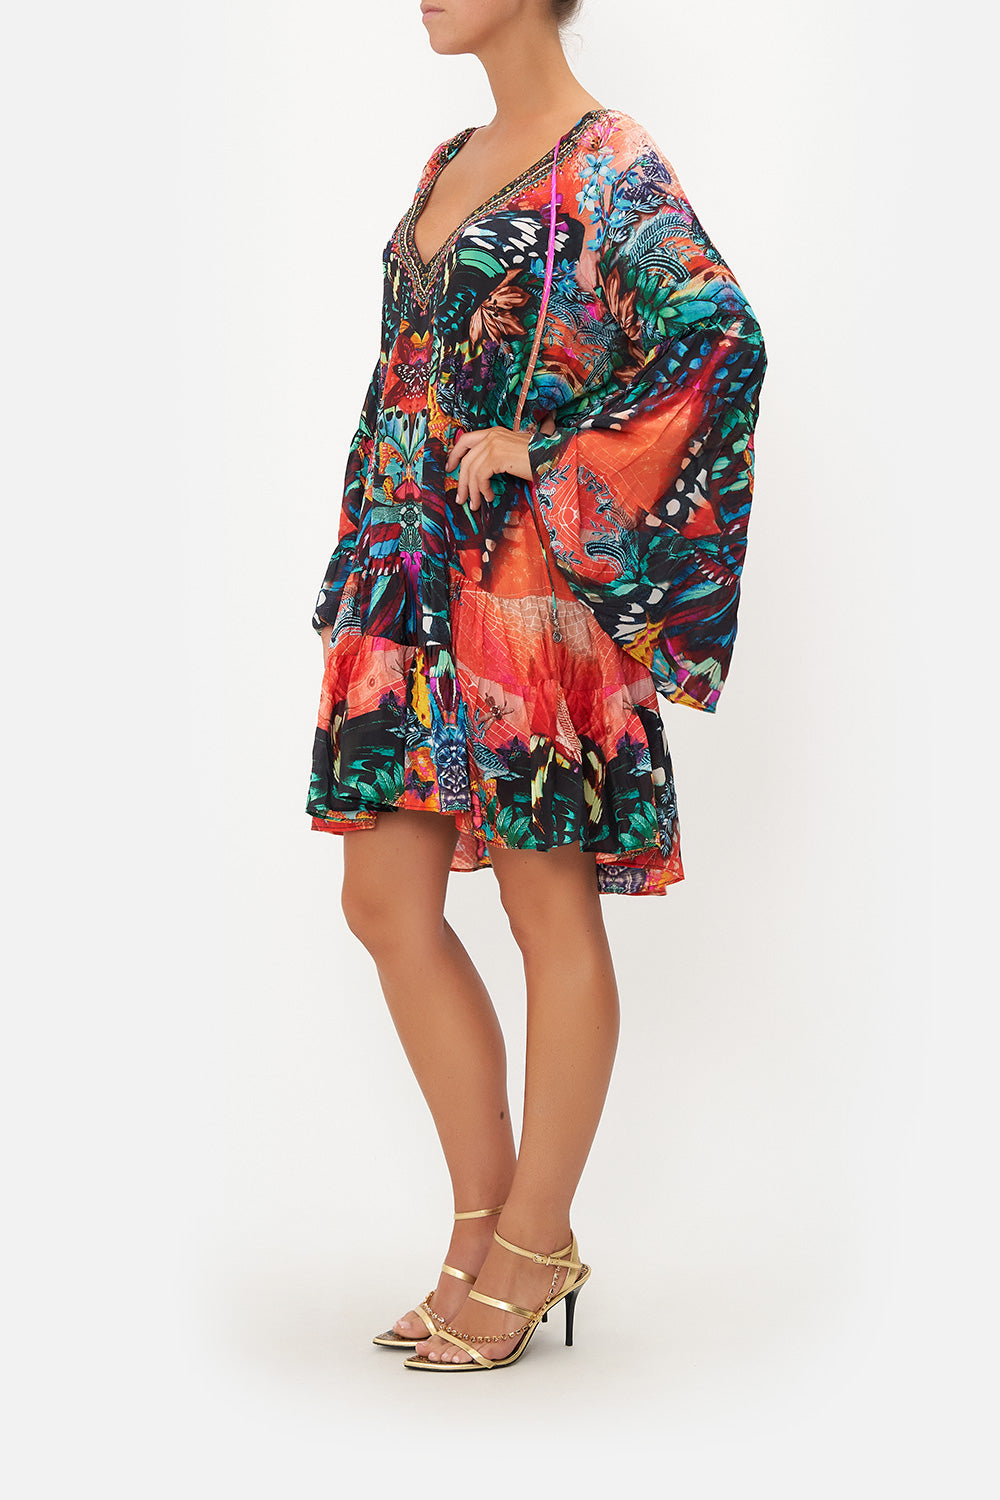 A-LINE GATHERED PANEL DRESS IN A FLUTTER